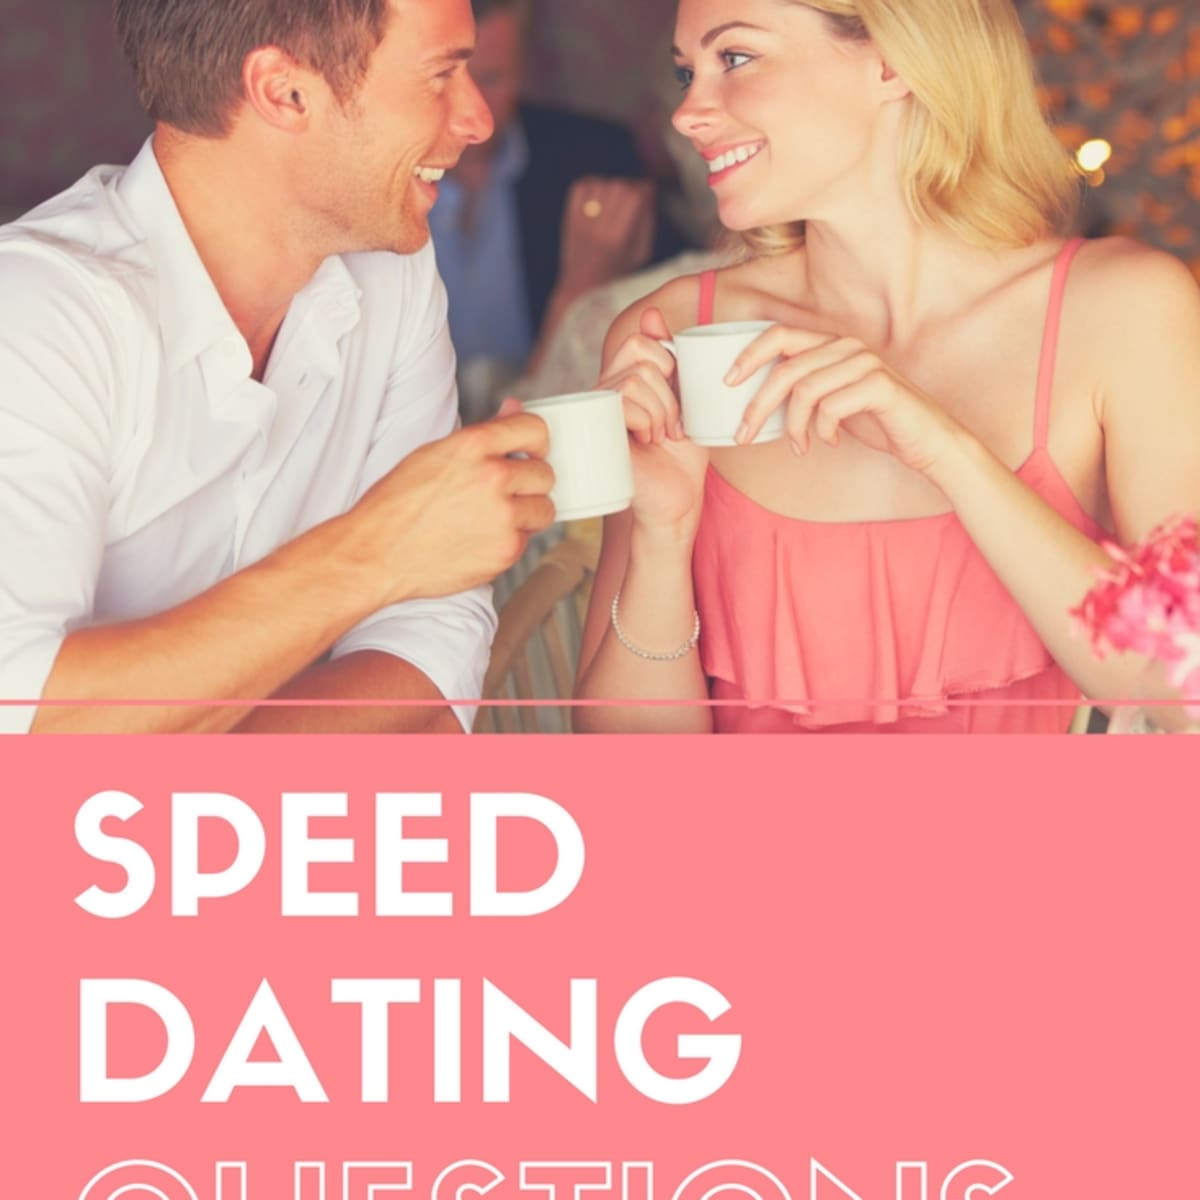 Fun Speed Dating Questions